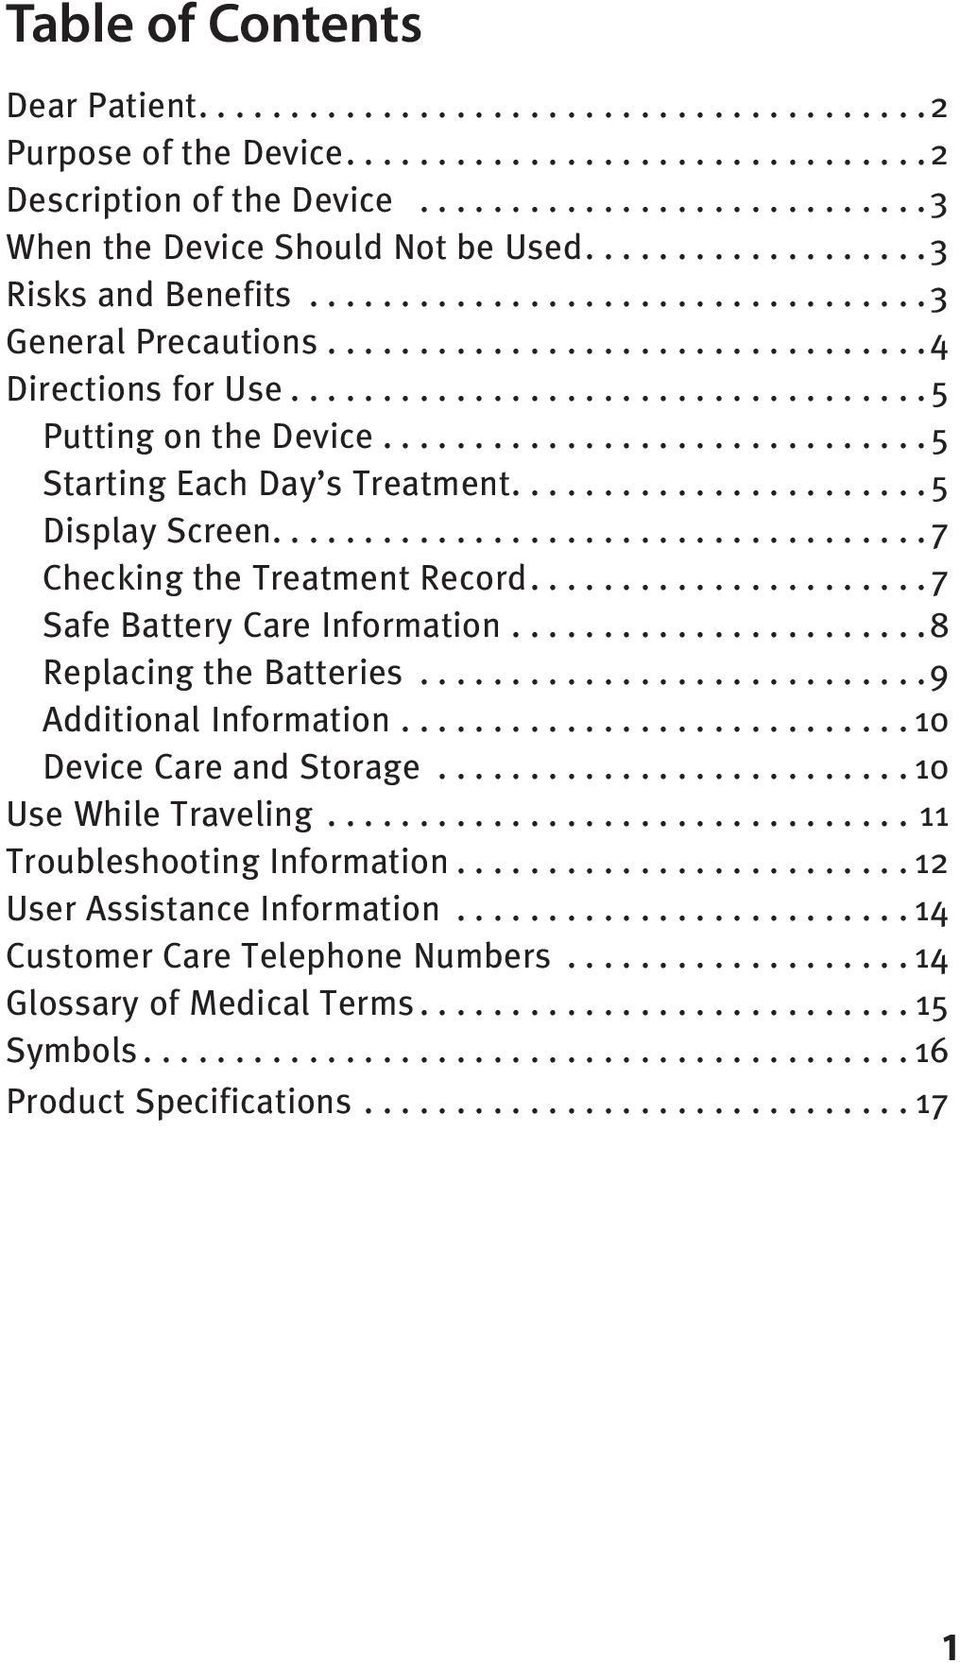 ...7 Safe Battery Care Information....8 Replacing the Batteries...9 Additional Information...10 Device Care and Storage...10 Use While Traveling.